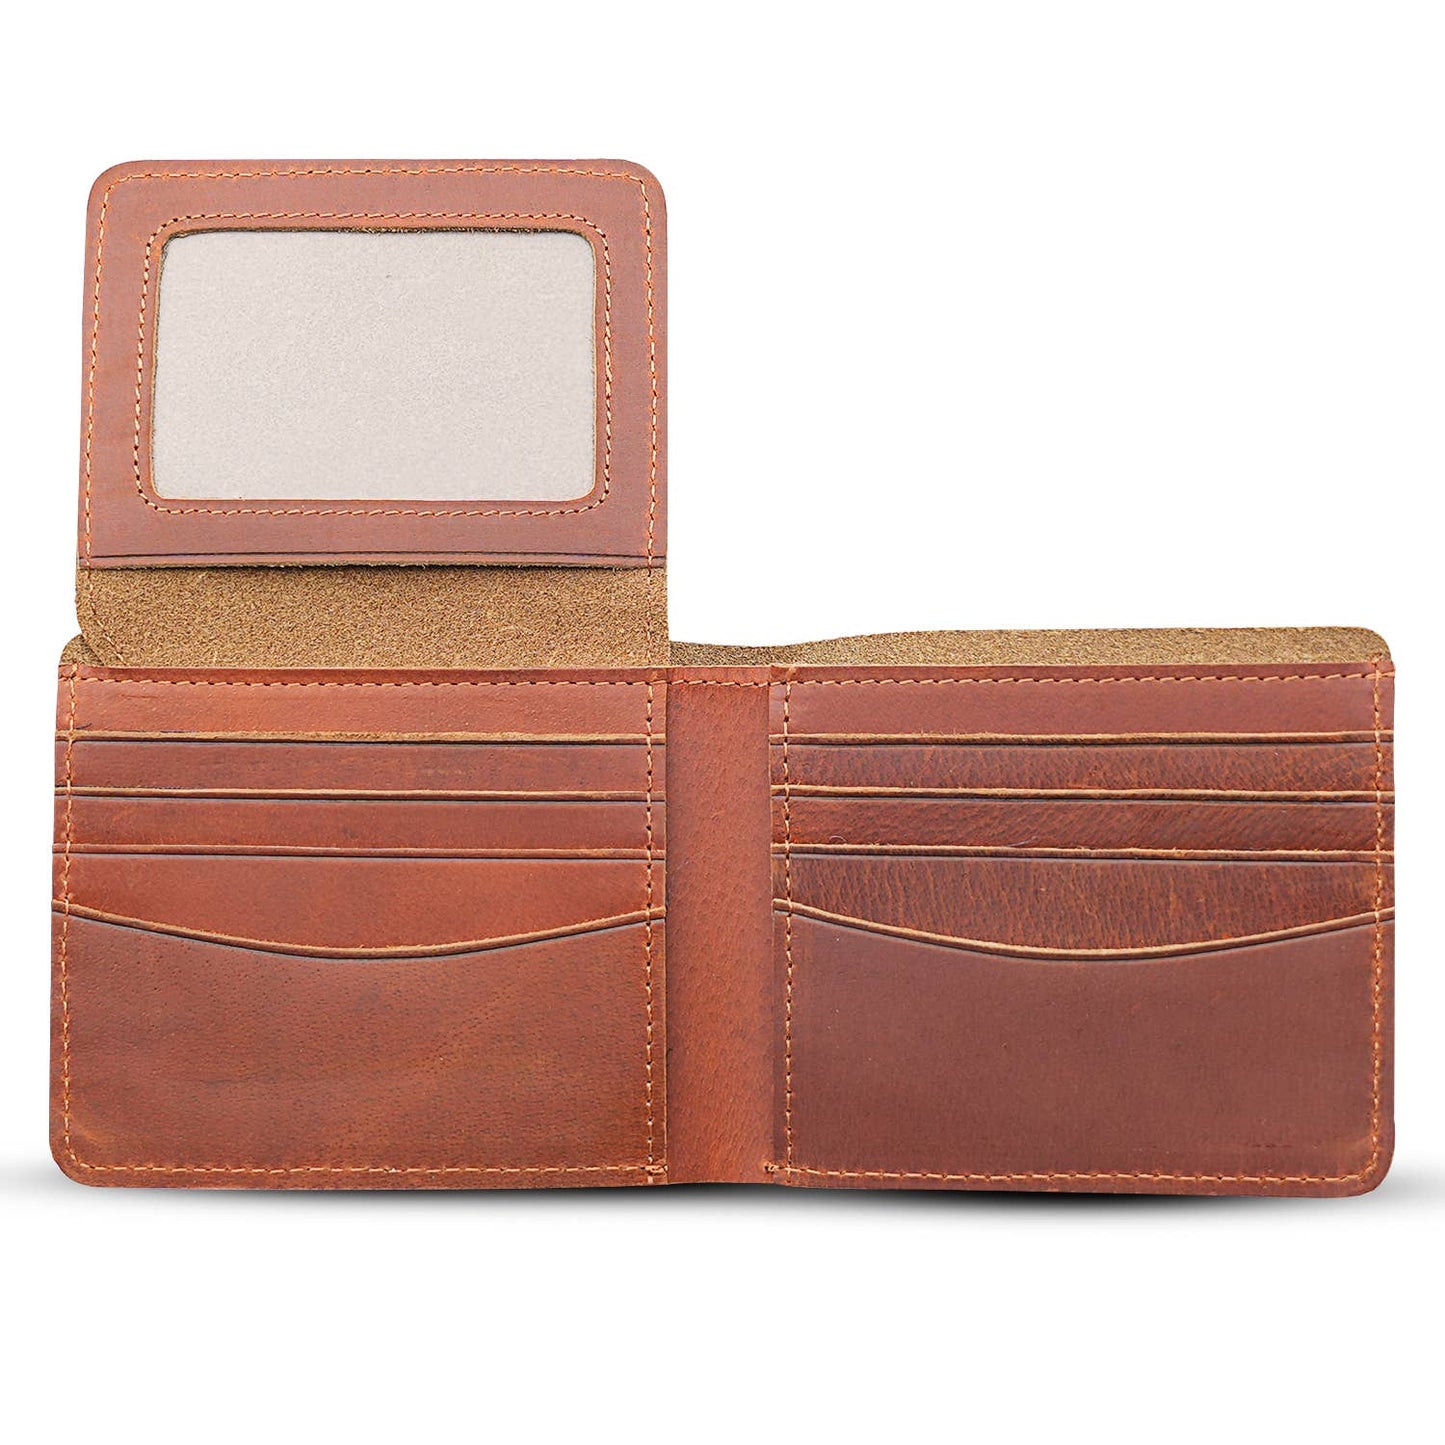 Genuine Leather Wallet for Men w/Flap out ID Window.